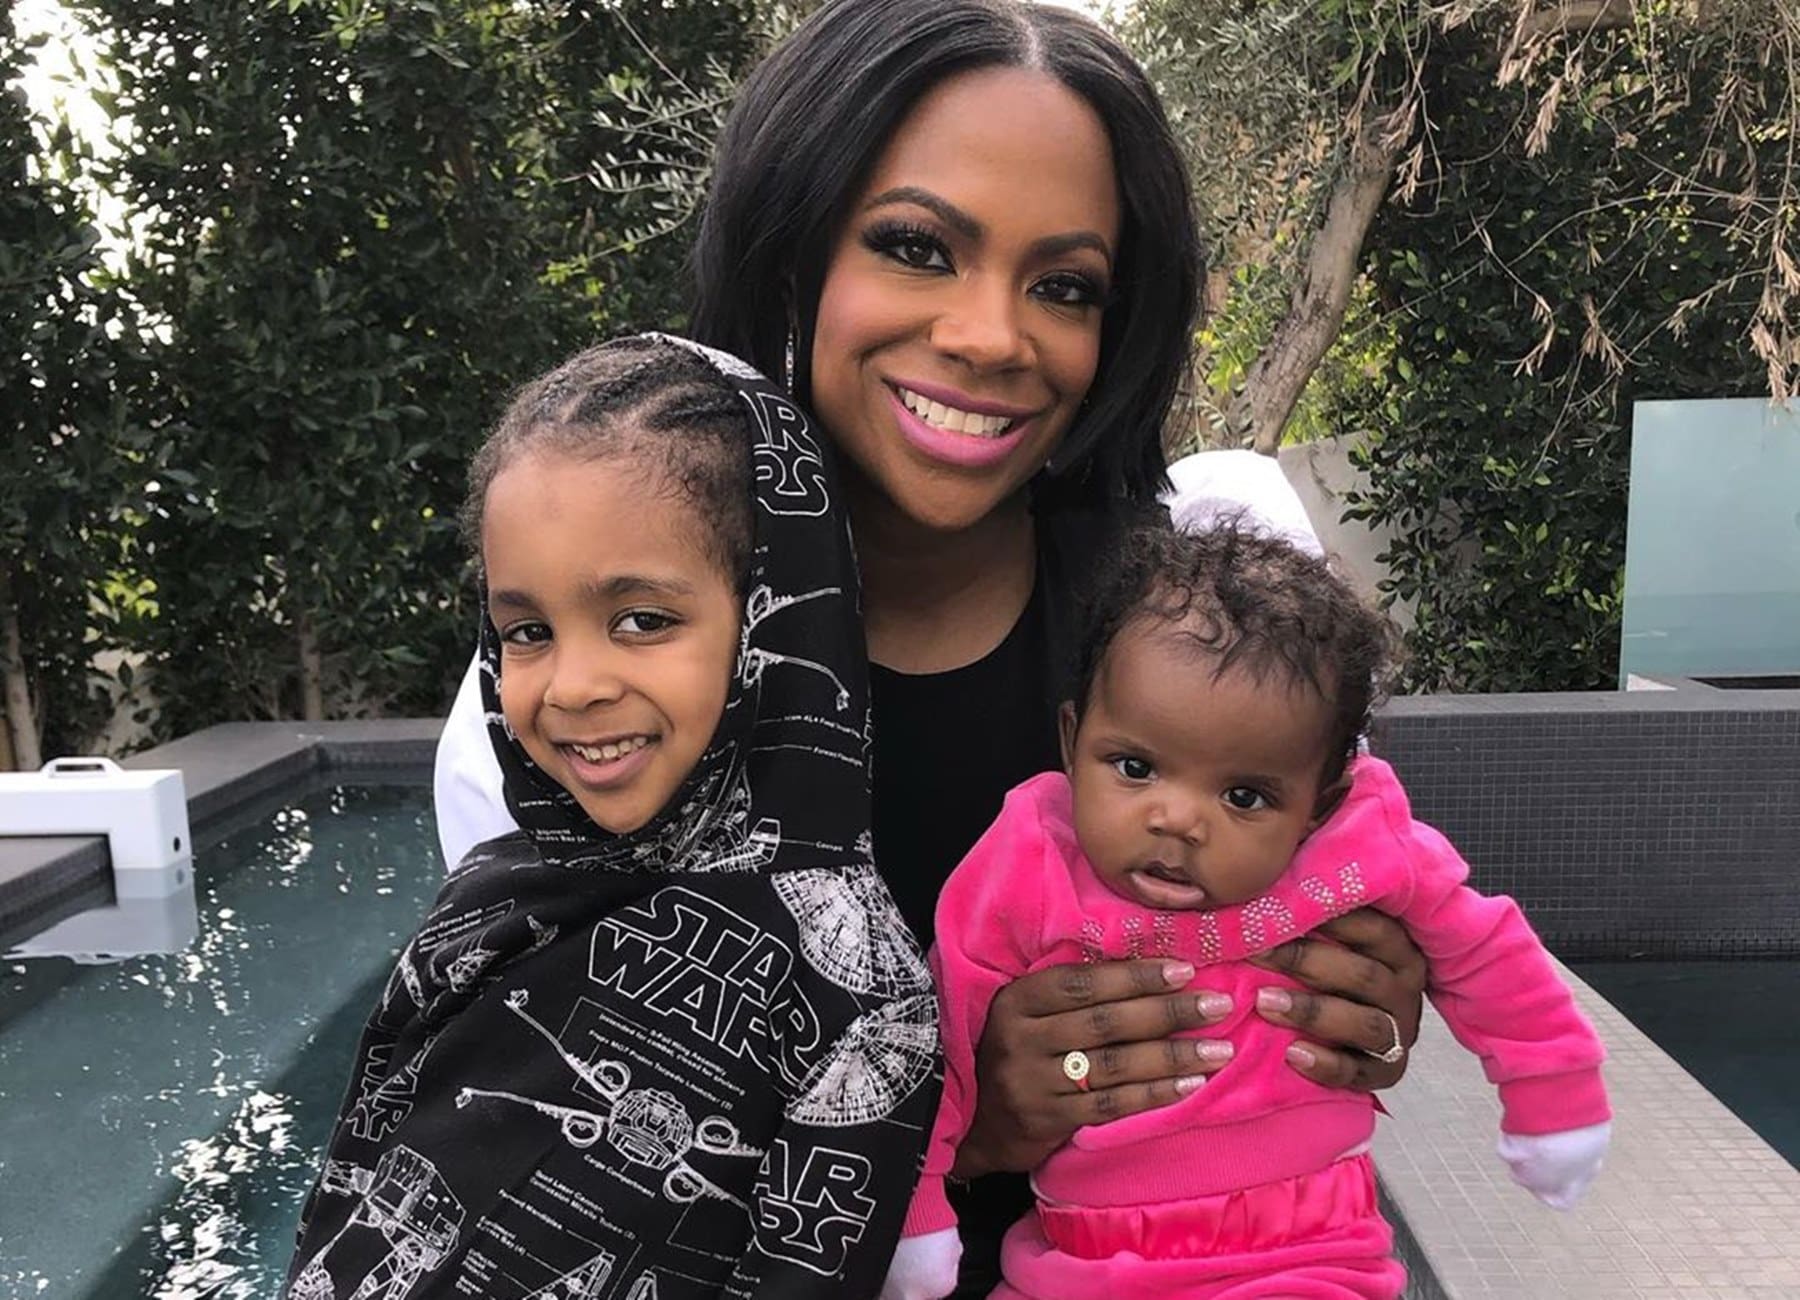 Kandi Burruss Cannot Wait To See What The Future Holds For Her Kids - See Their Sweet Photo Together